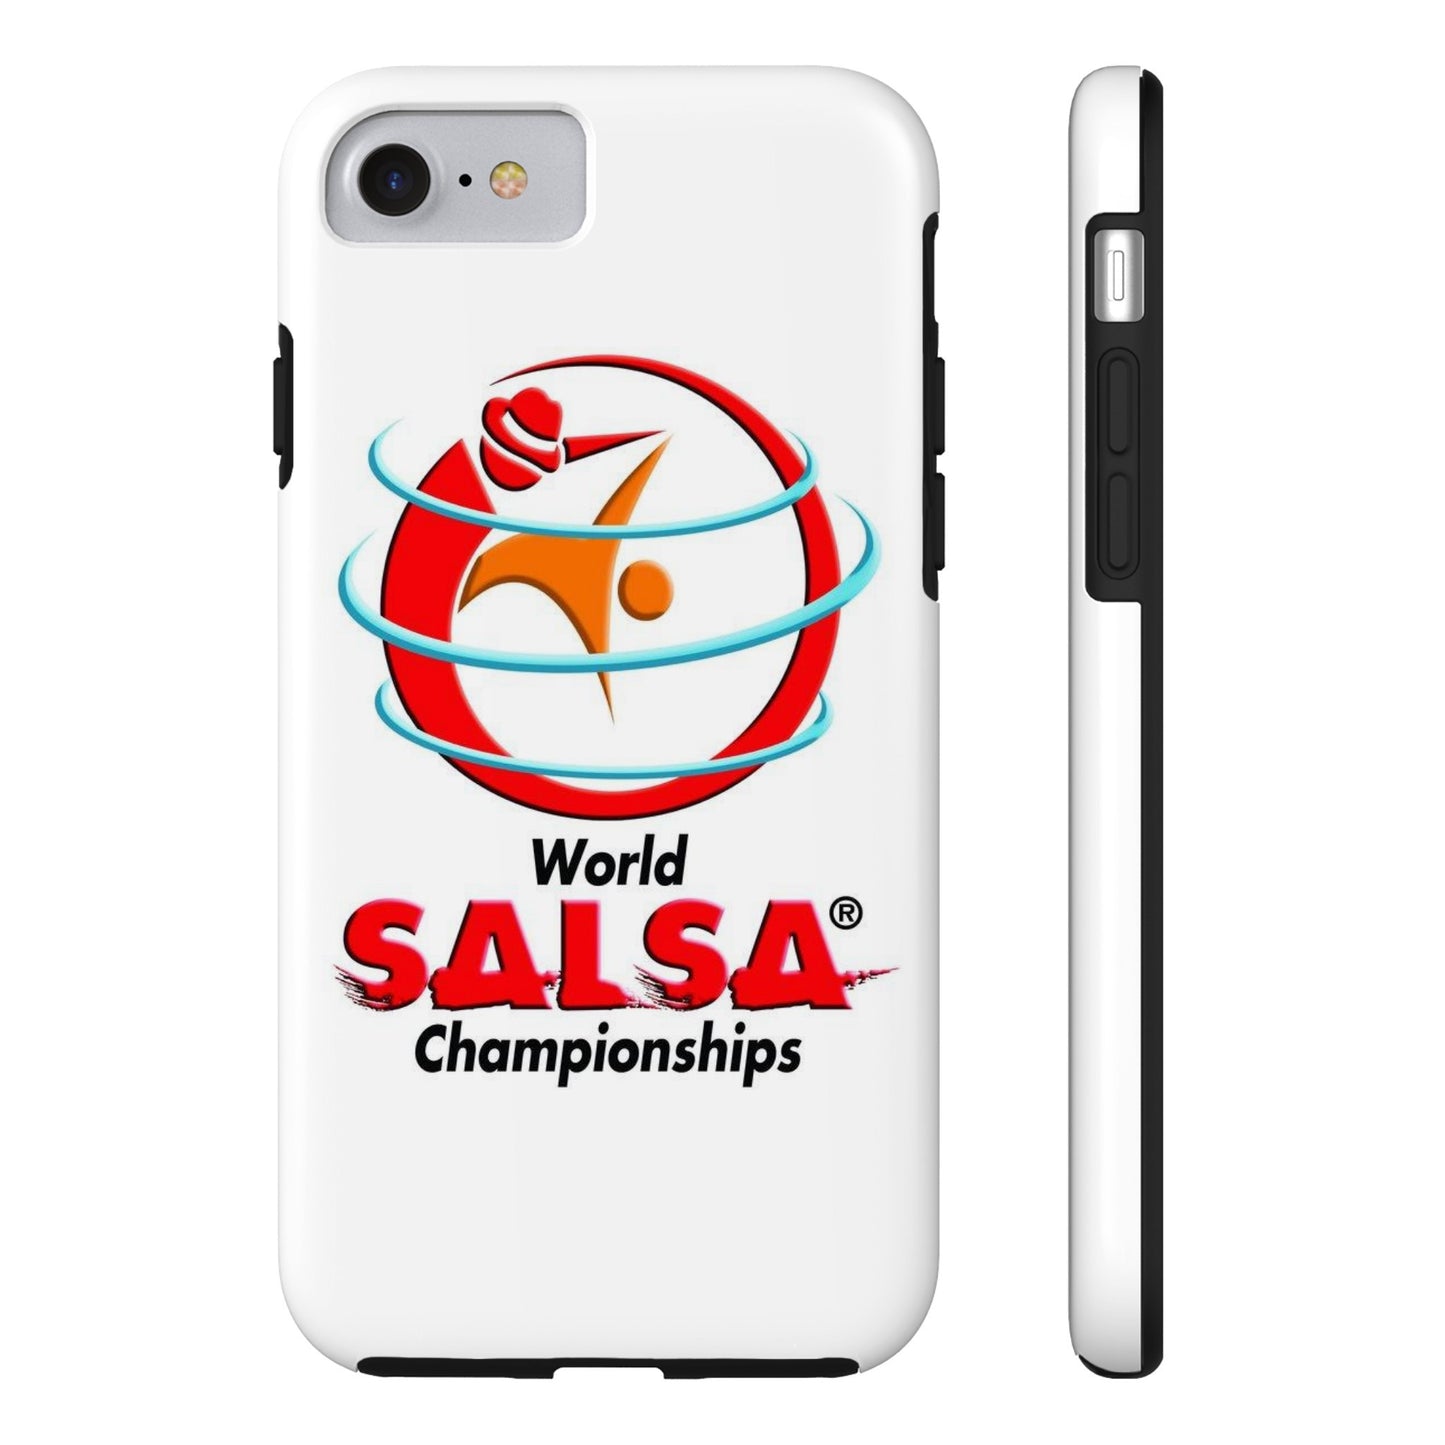 Tough iPhone 7 cover with World Salsa Championships Logo - World Salsa Championships